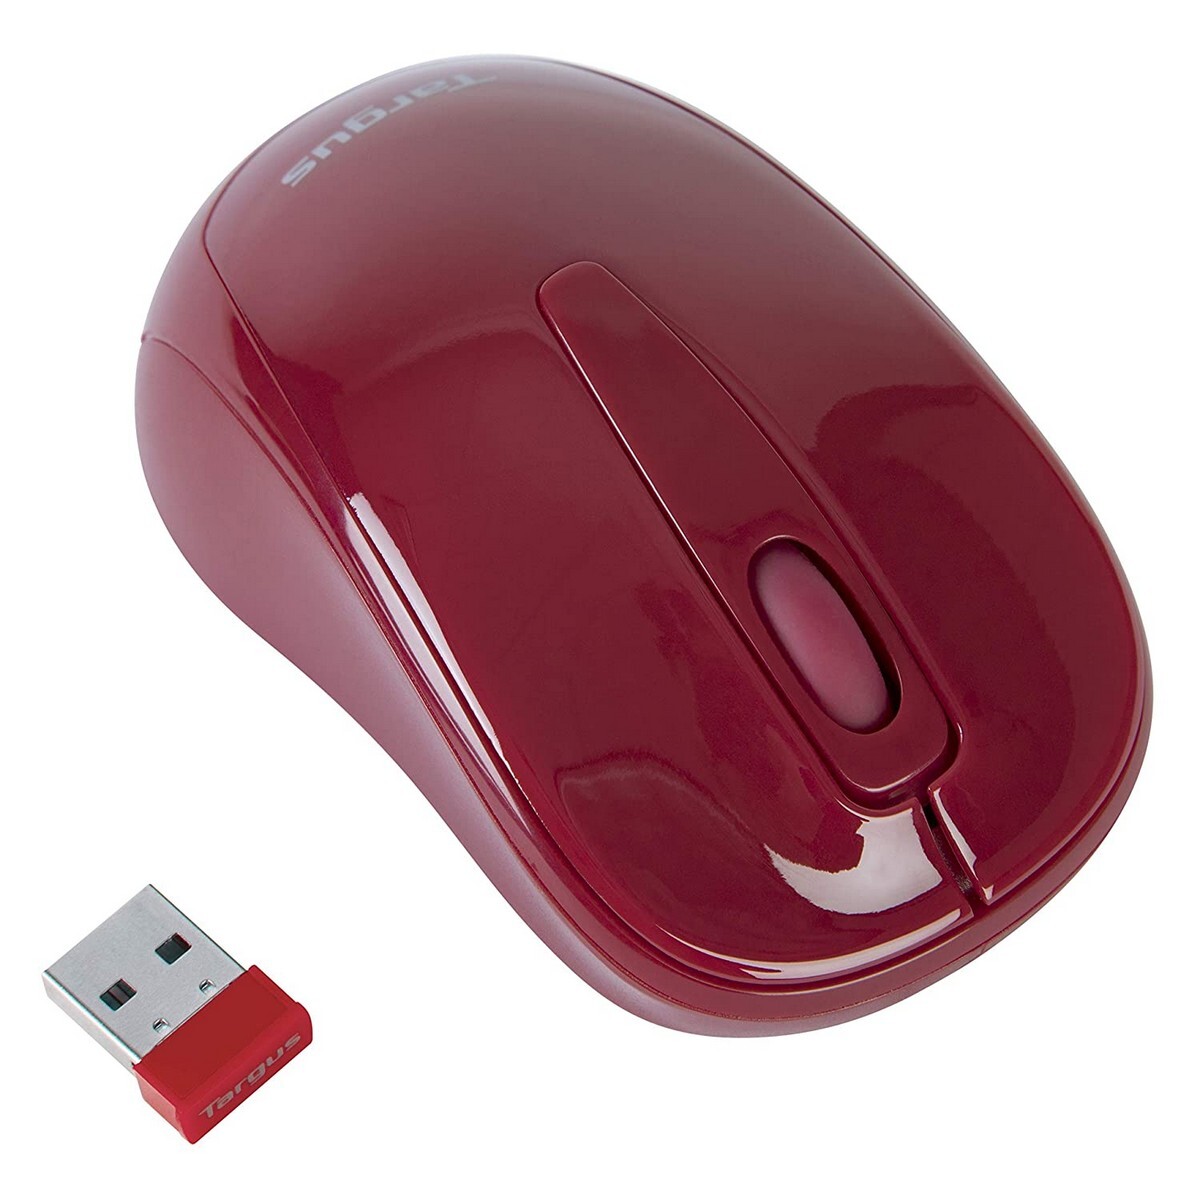 Targus Wireless Mouse W600 Red